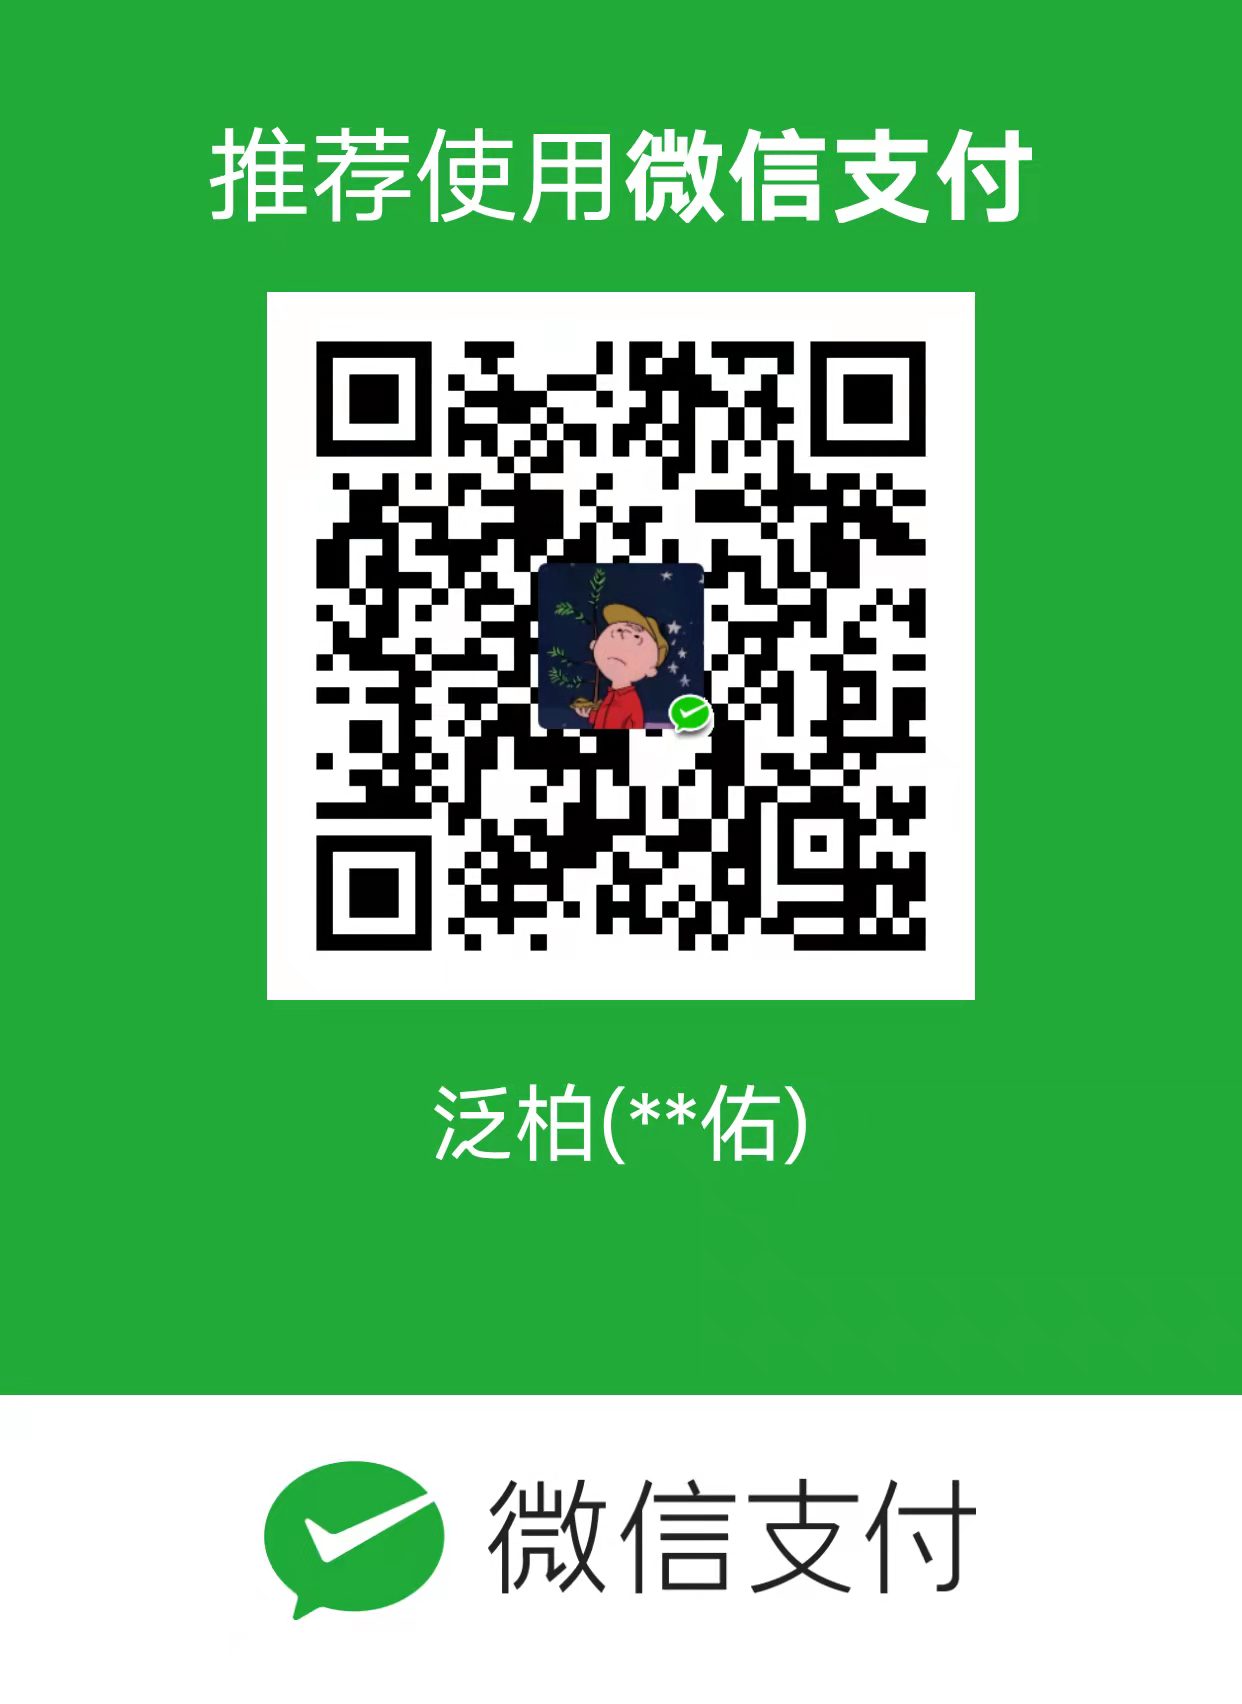  WeChat Pay